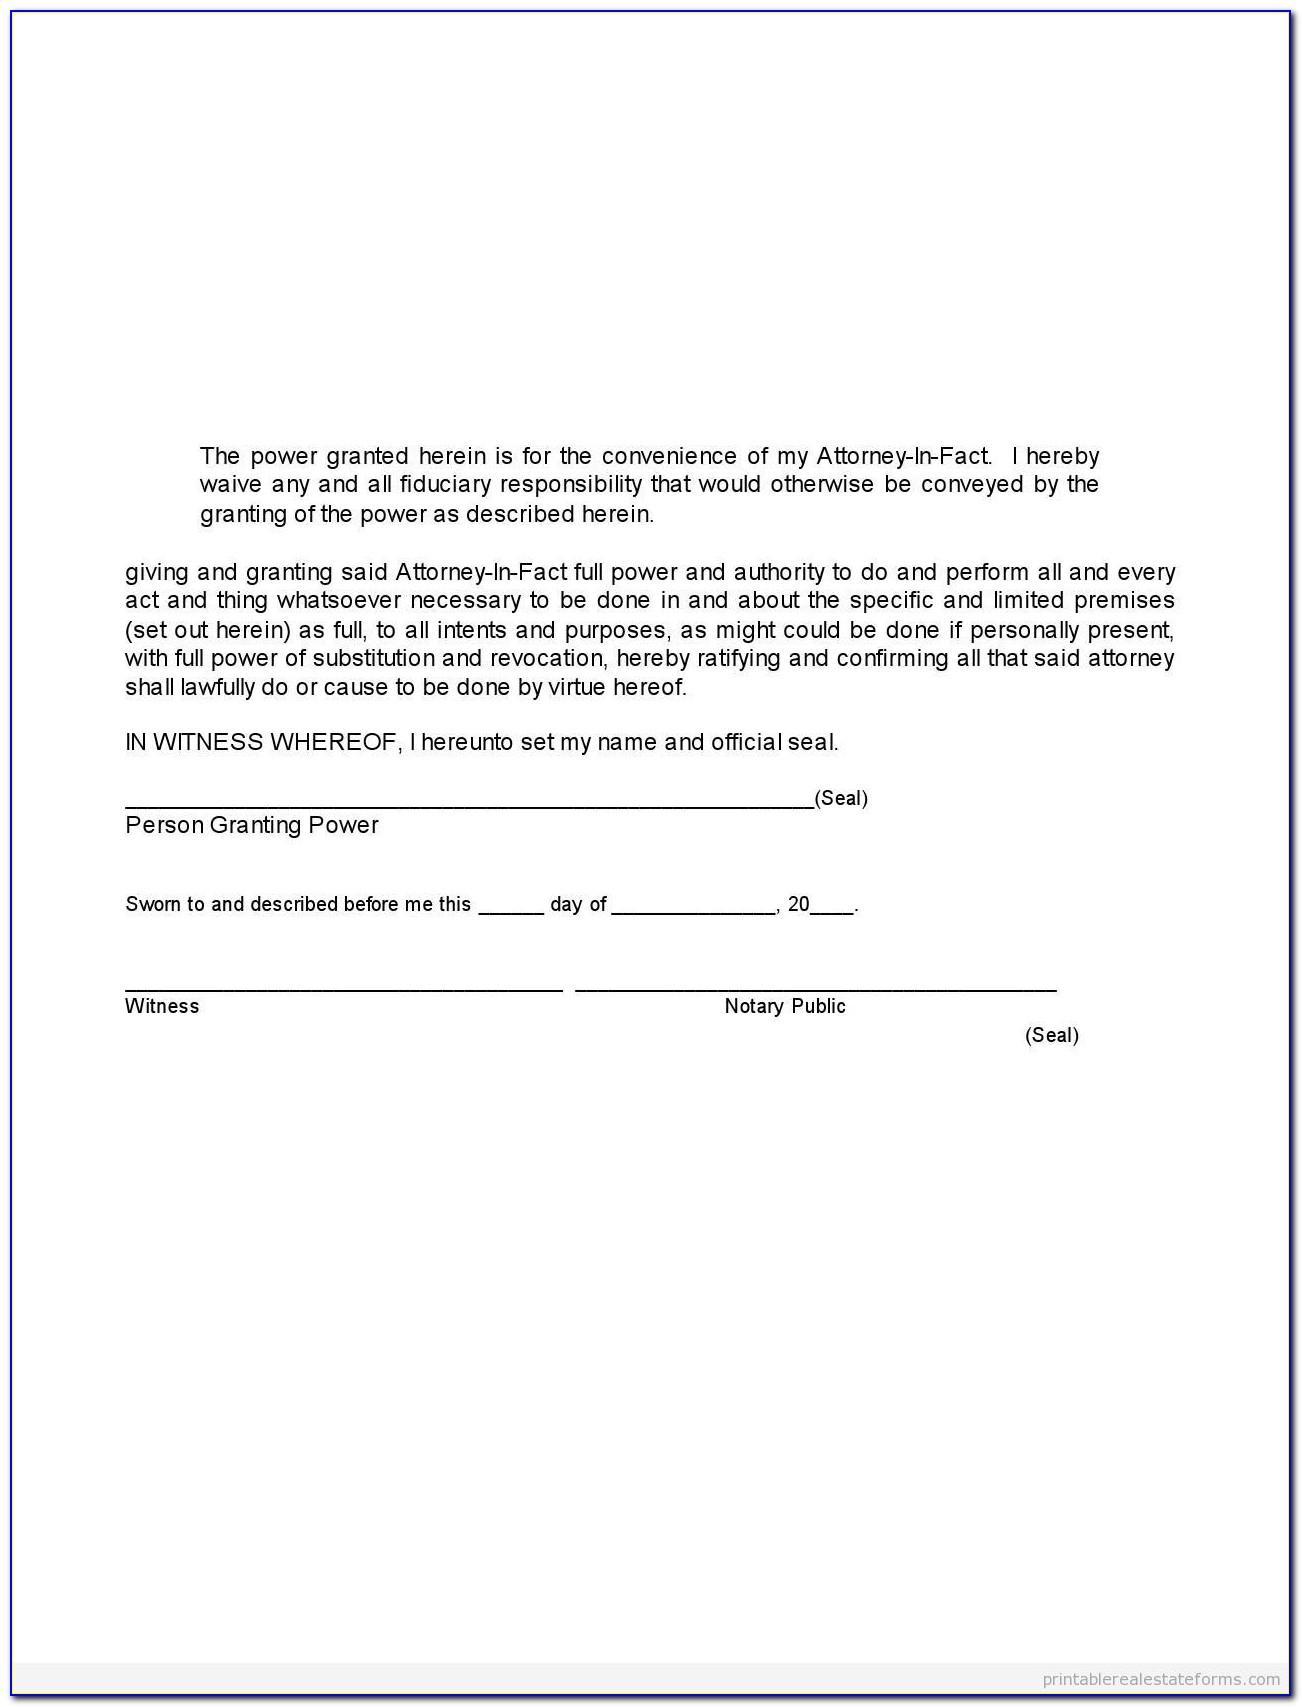 Sample Power Of Attorney Format